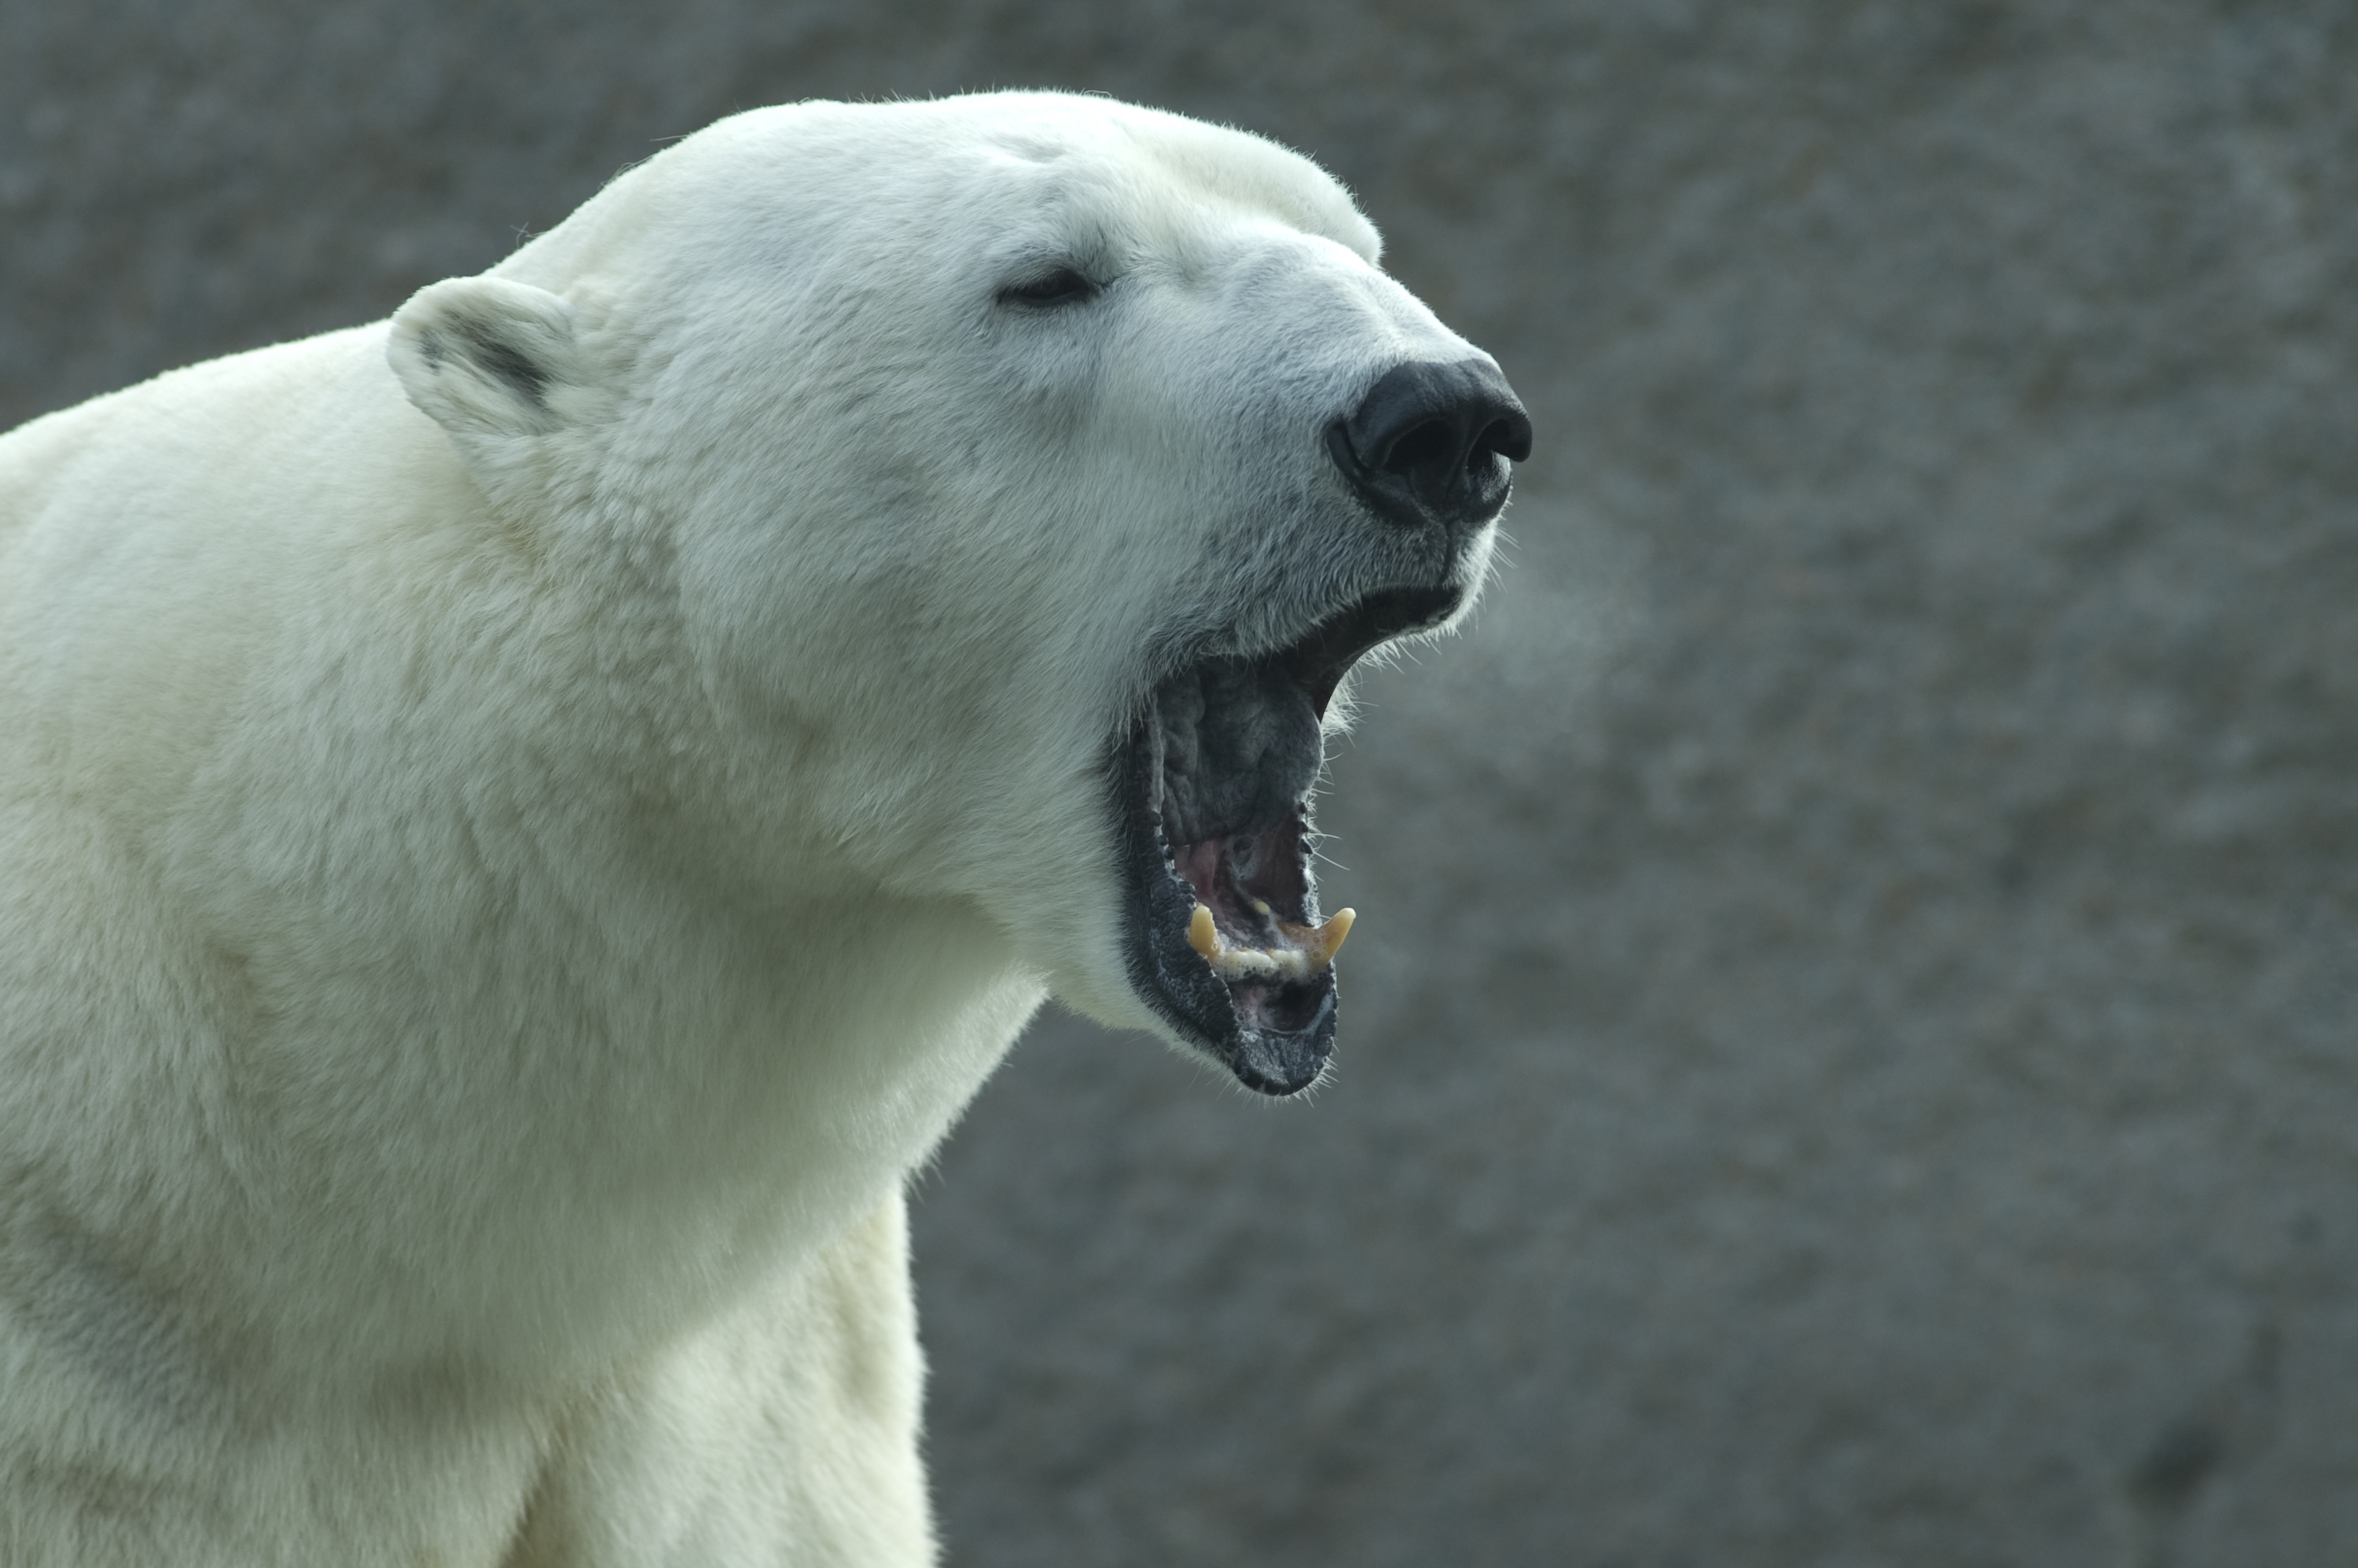 climate-change-possibly-a-factor-in-fatal-polar-bear-attack